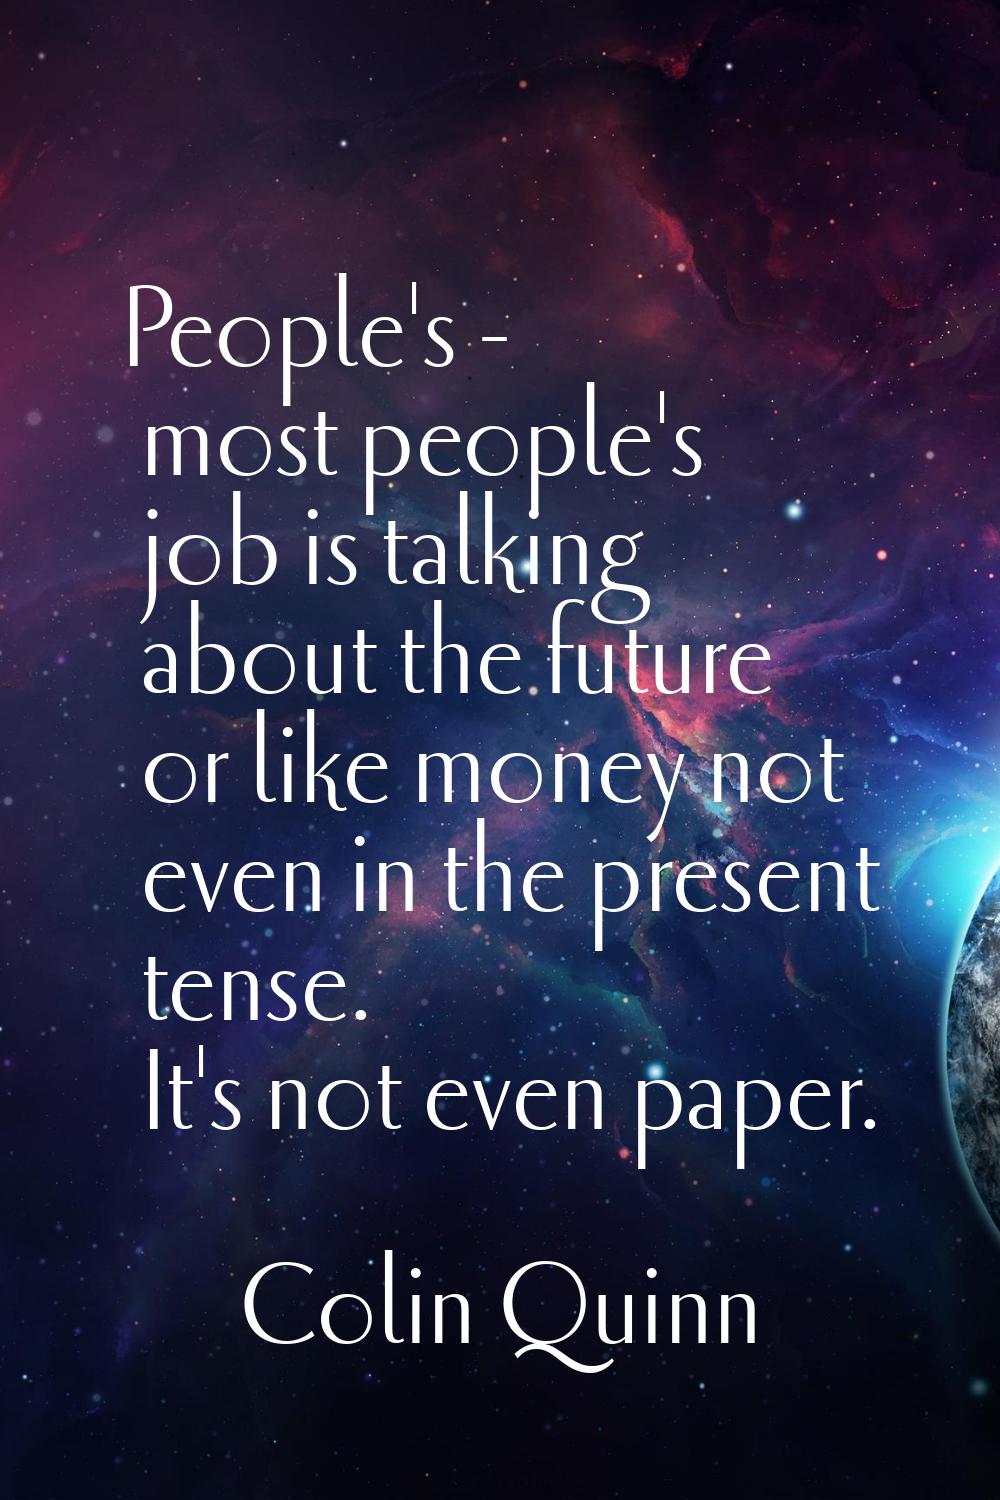 People's - most people's job is talking about the future or like money not even in the present tens